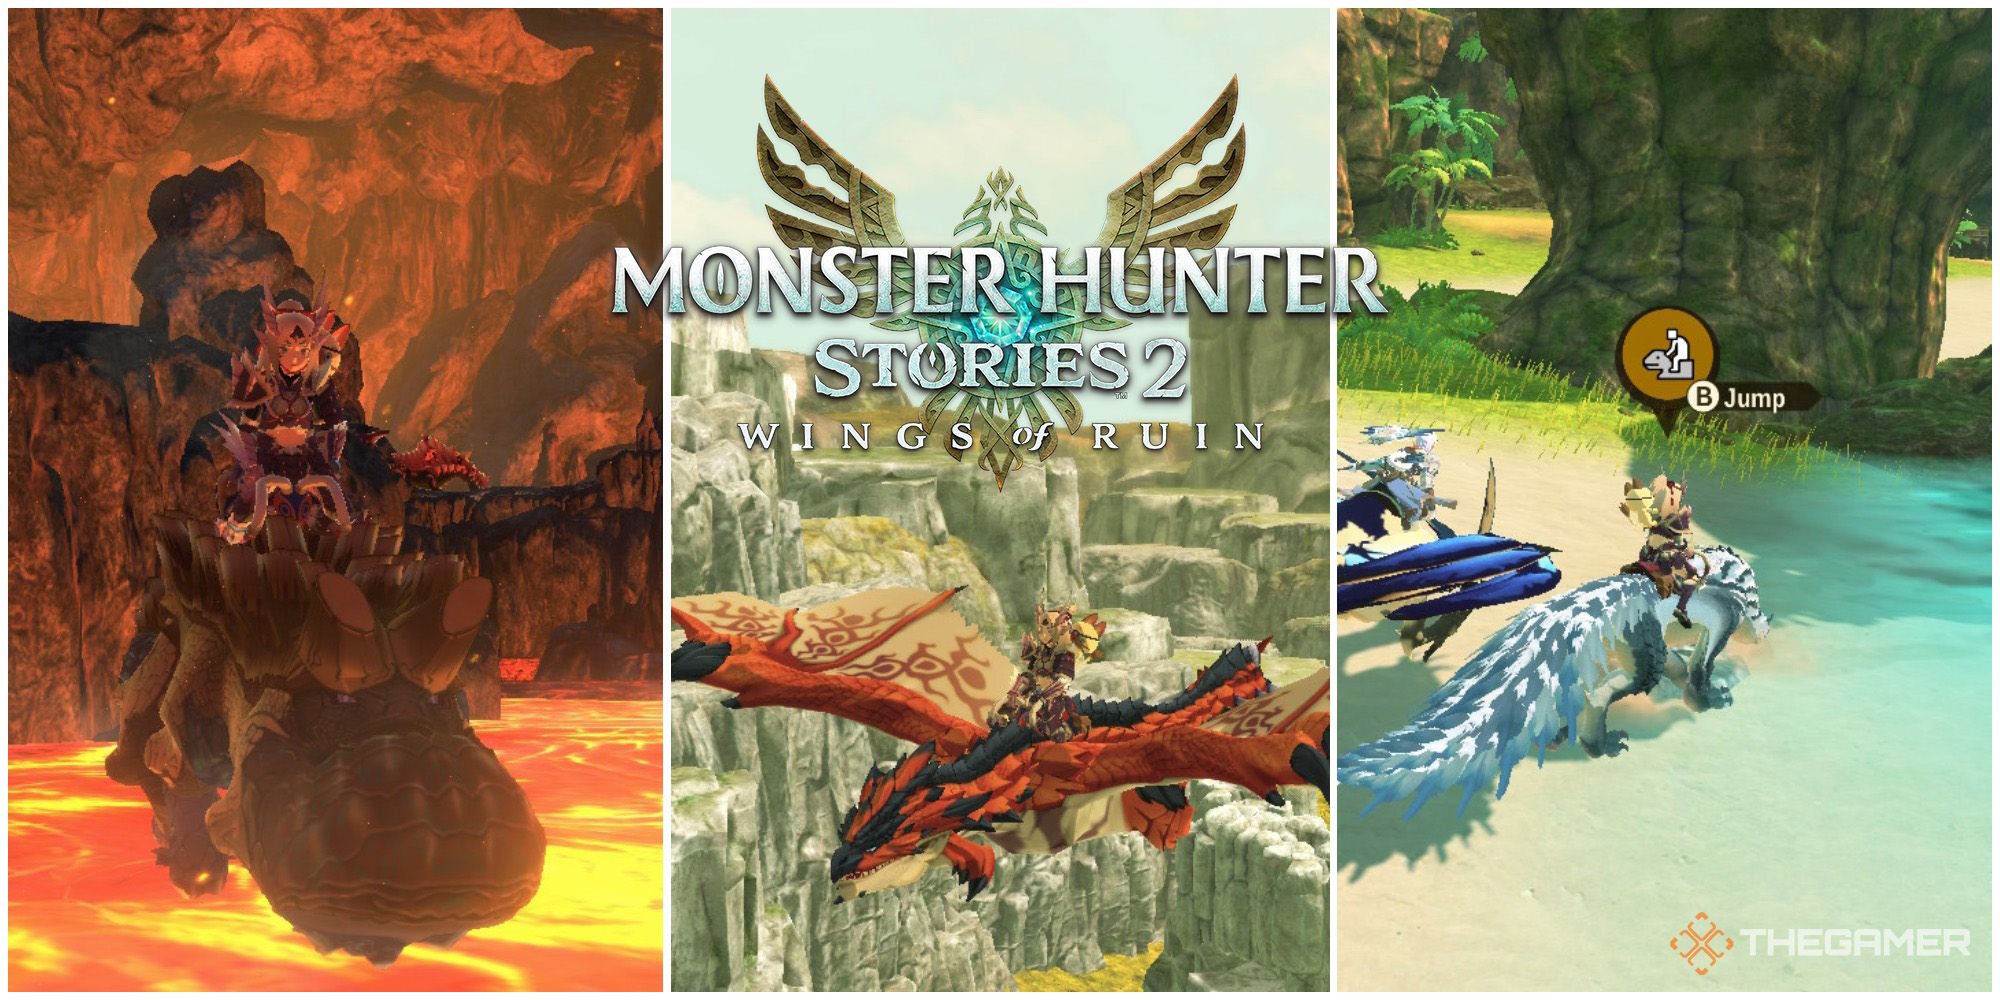 Monster Hunter Stories 2 Wings of Ruin monstie riding action collage